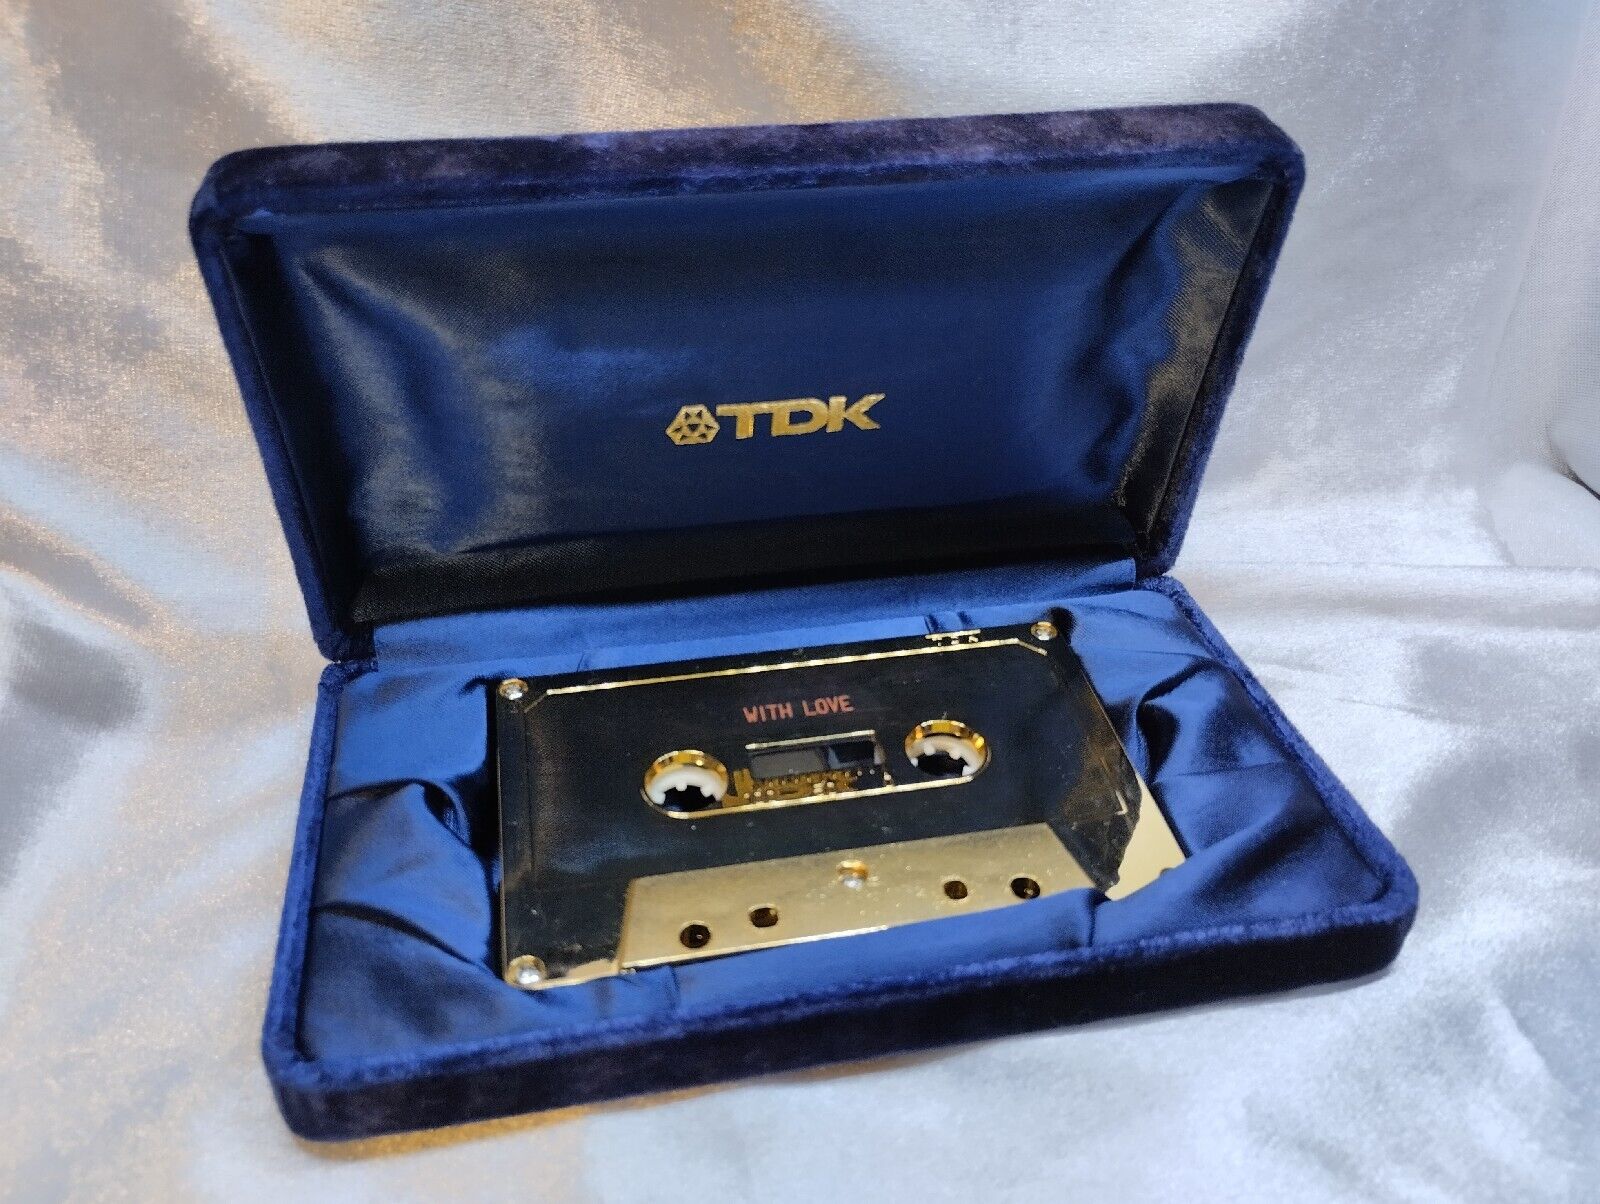 RARE Vintage 1978 Collectible Golden TDK Cassette Tape Limited 3,000 Made